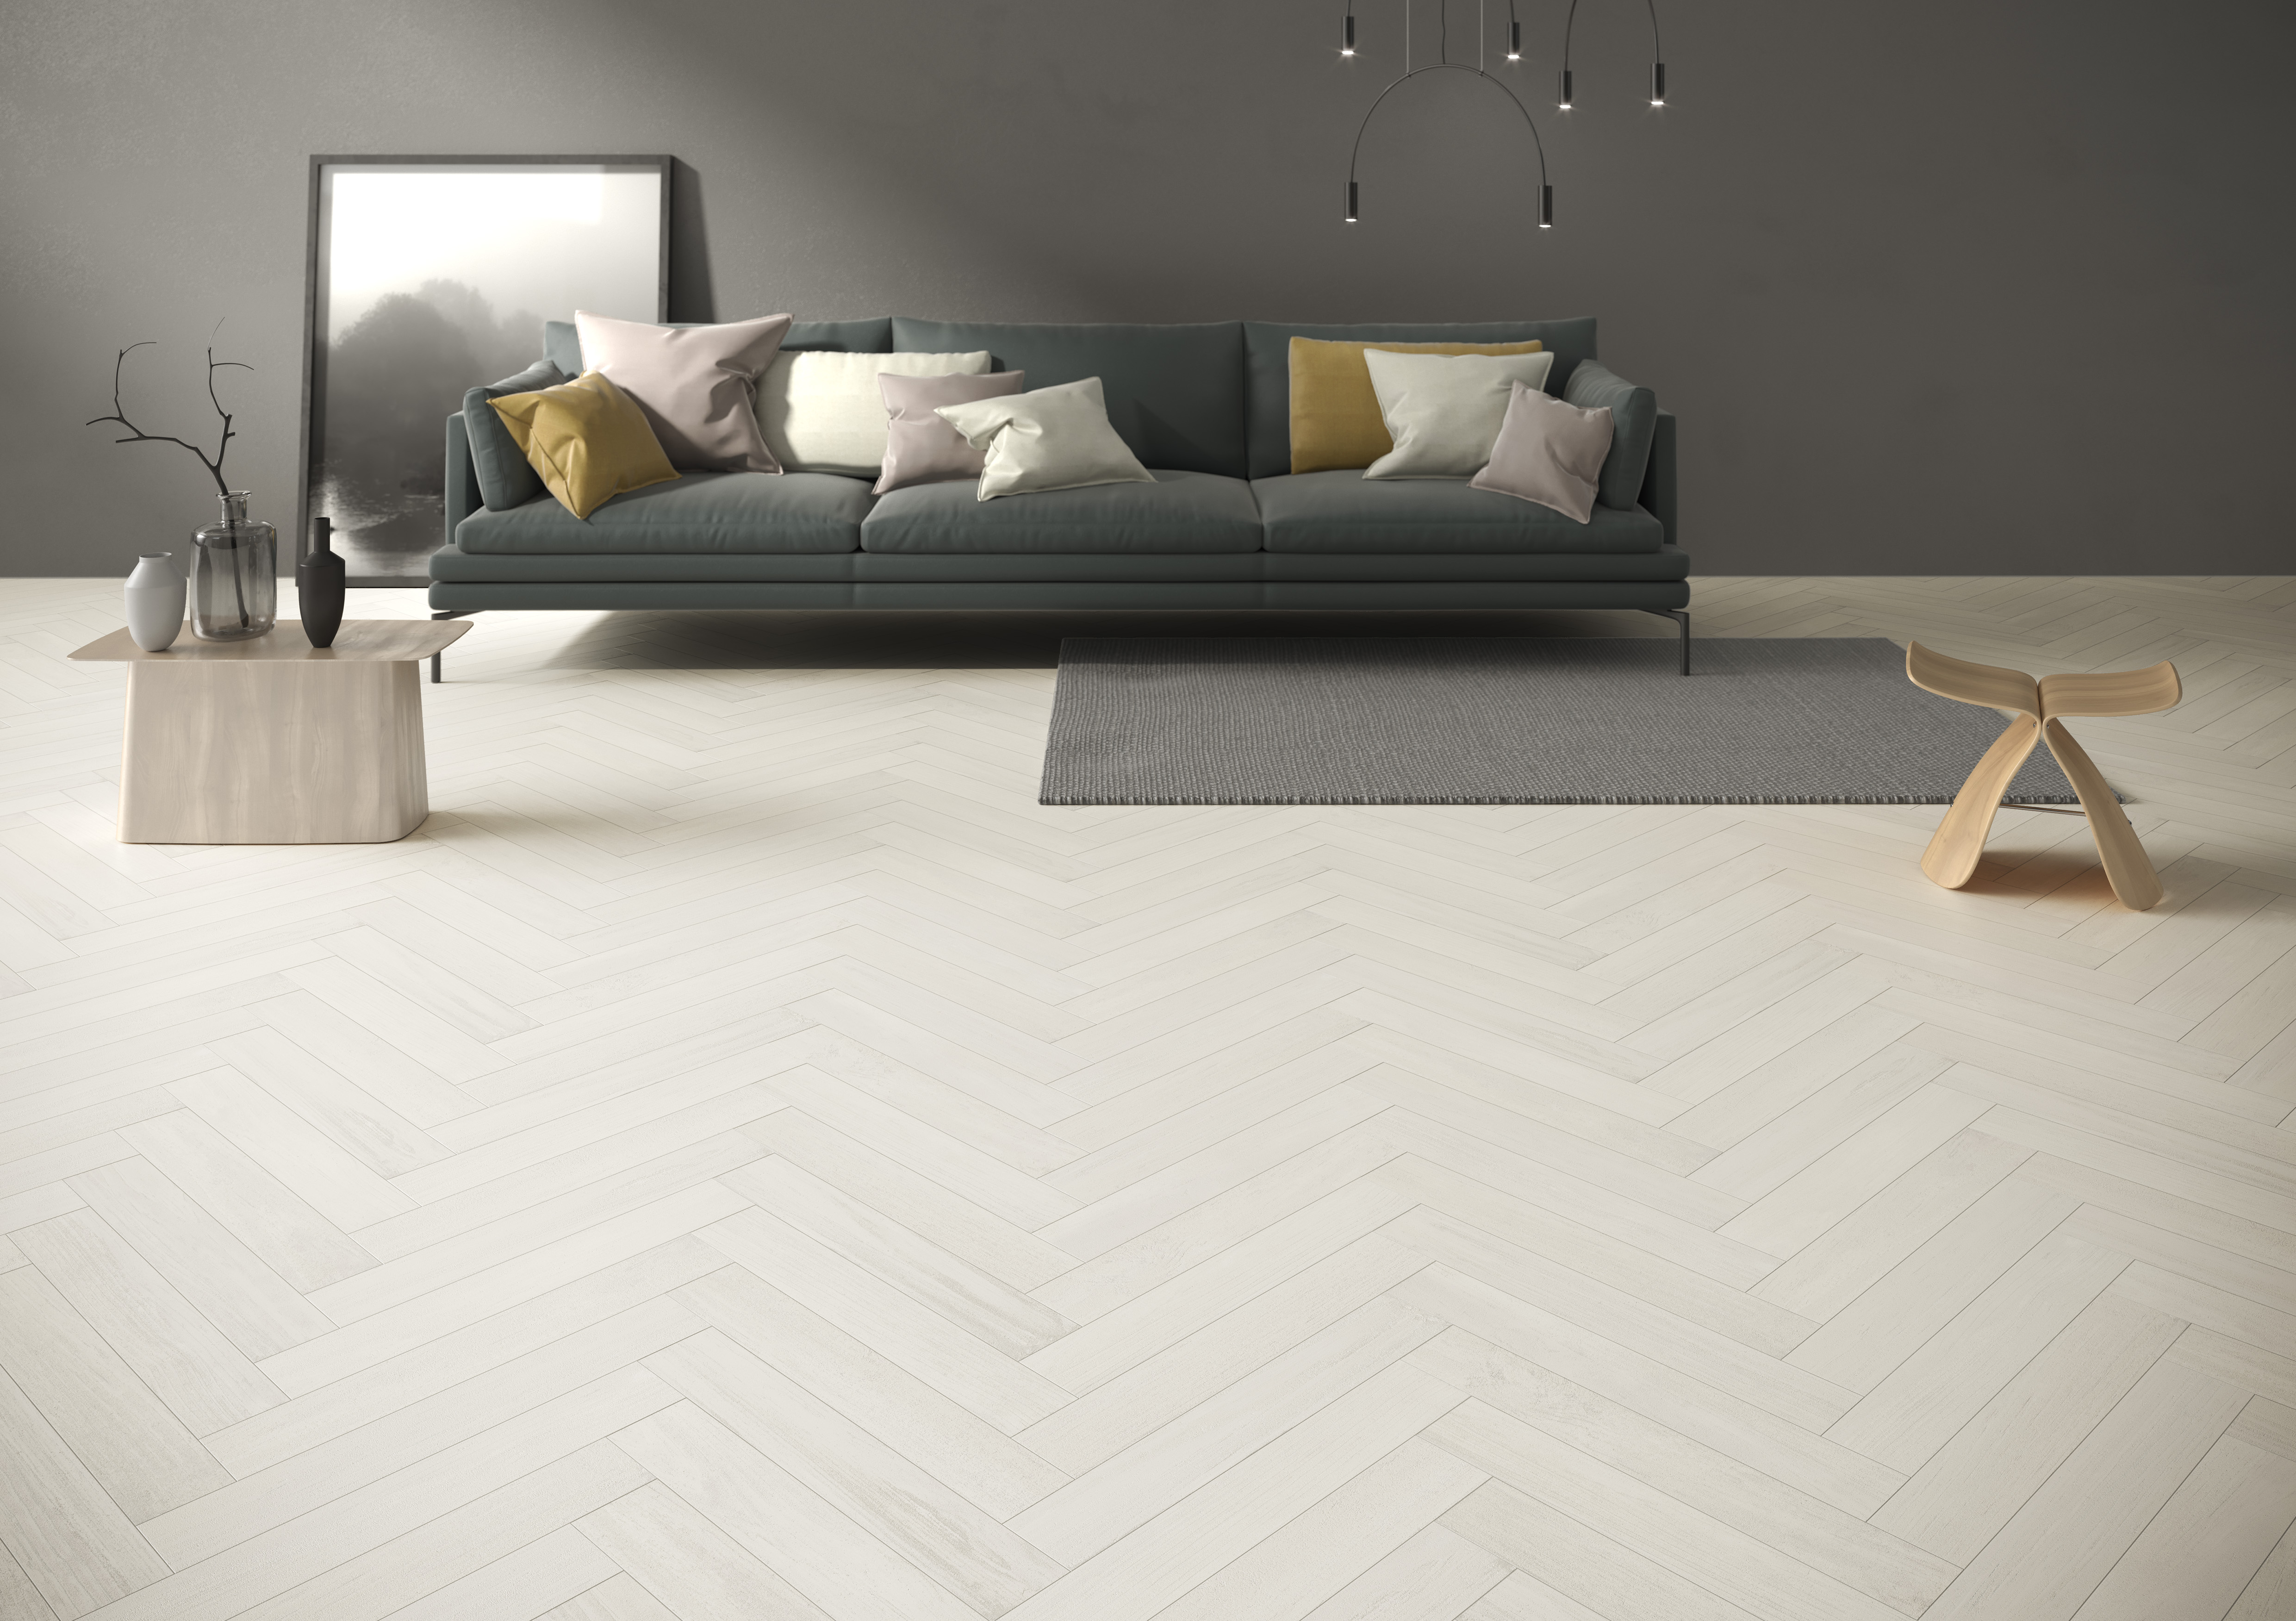  Floor tiles from the Columbus collection by Harmony.